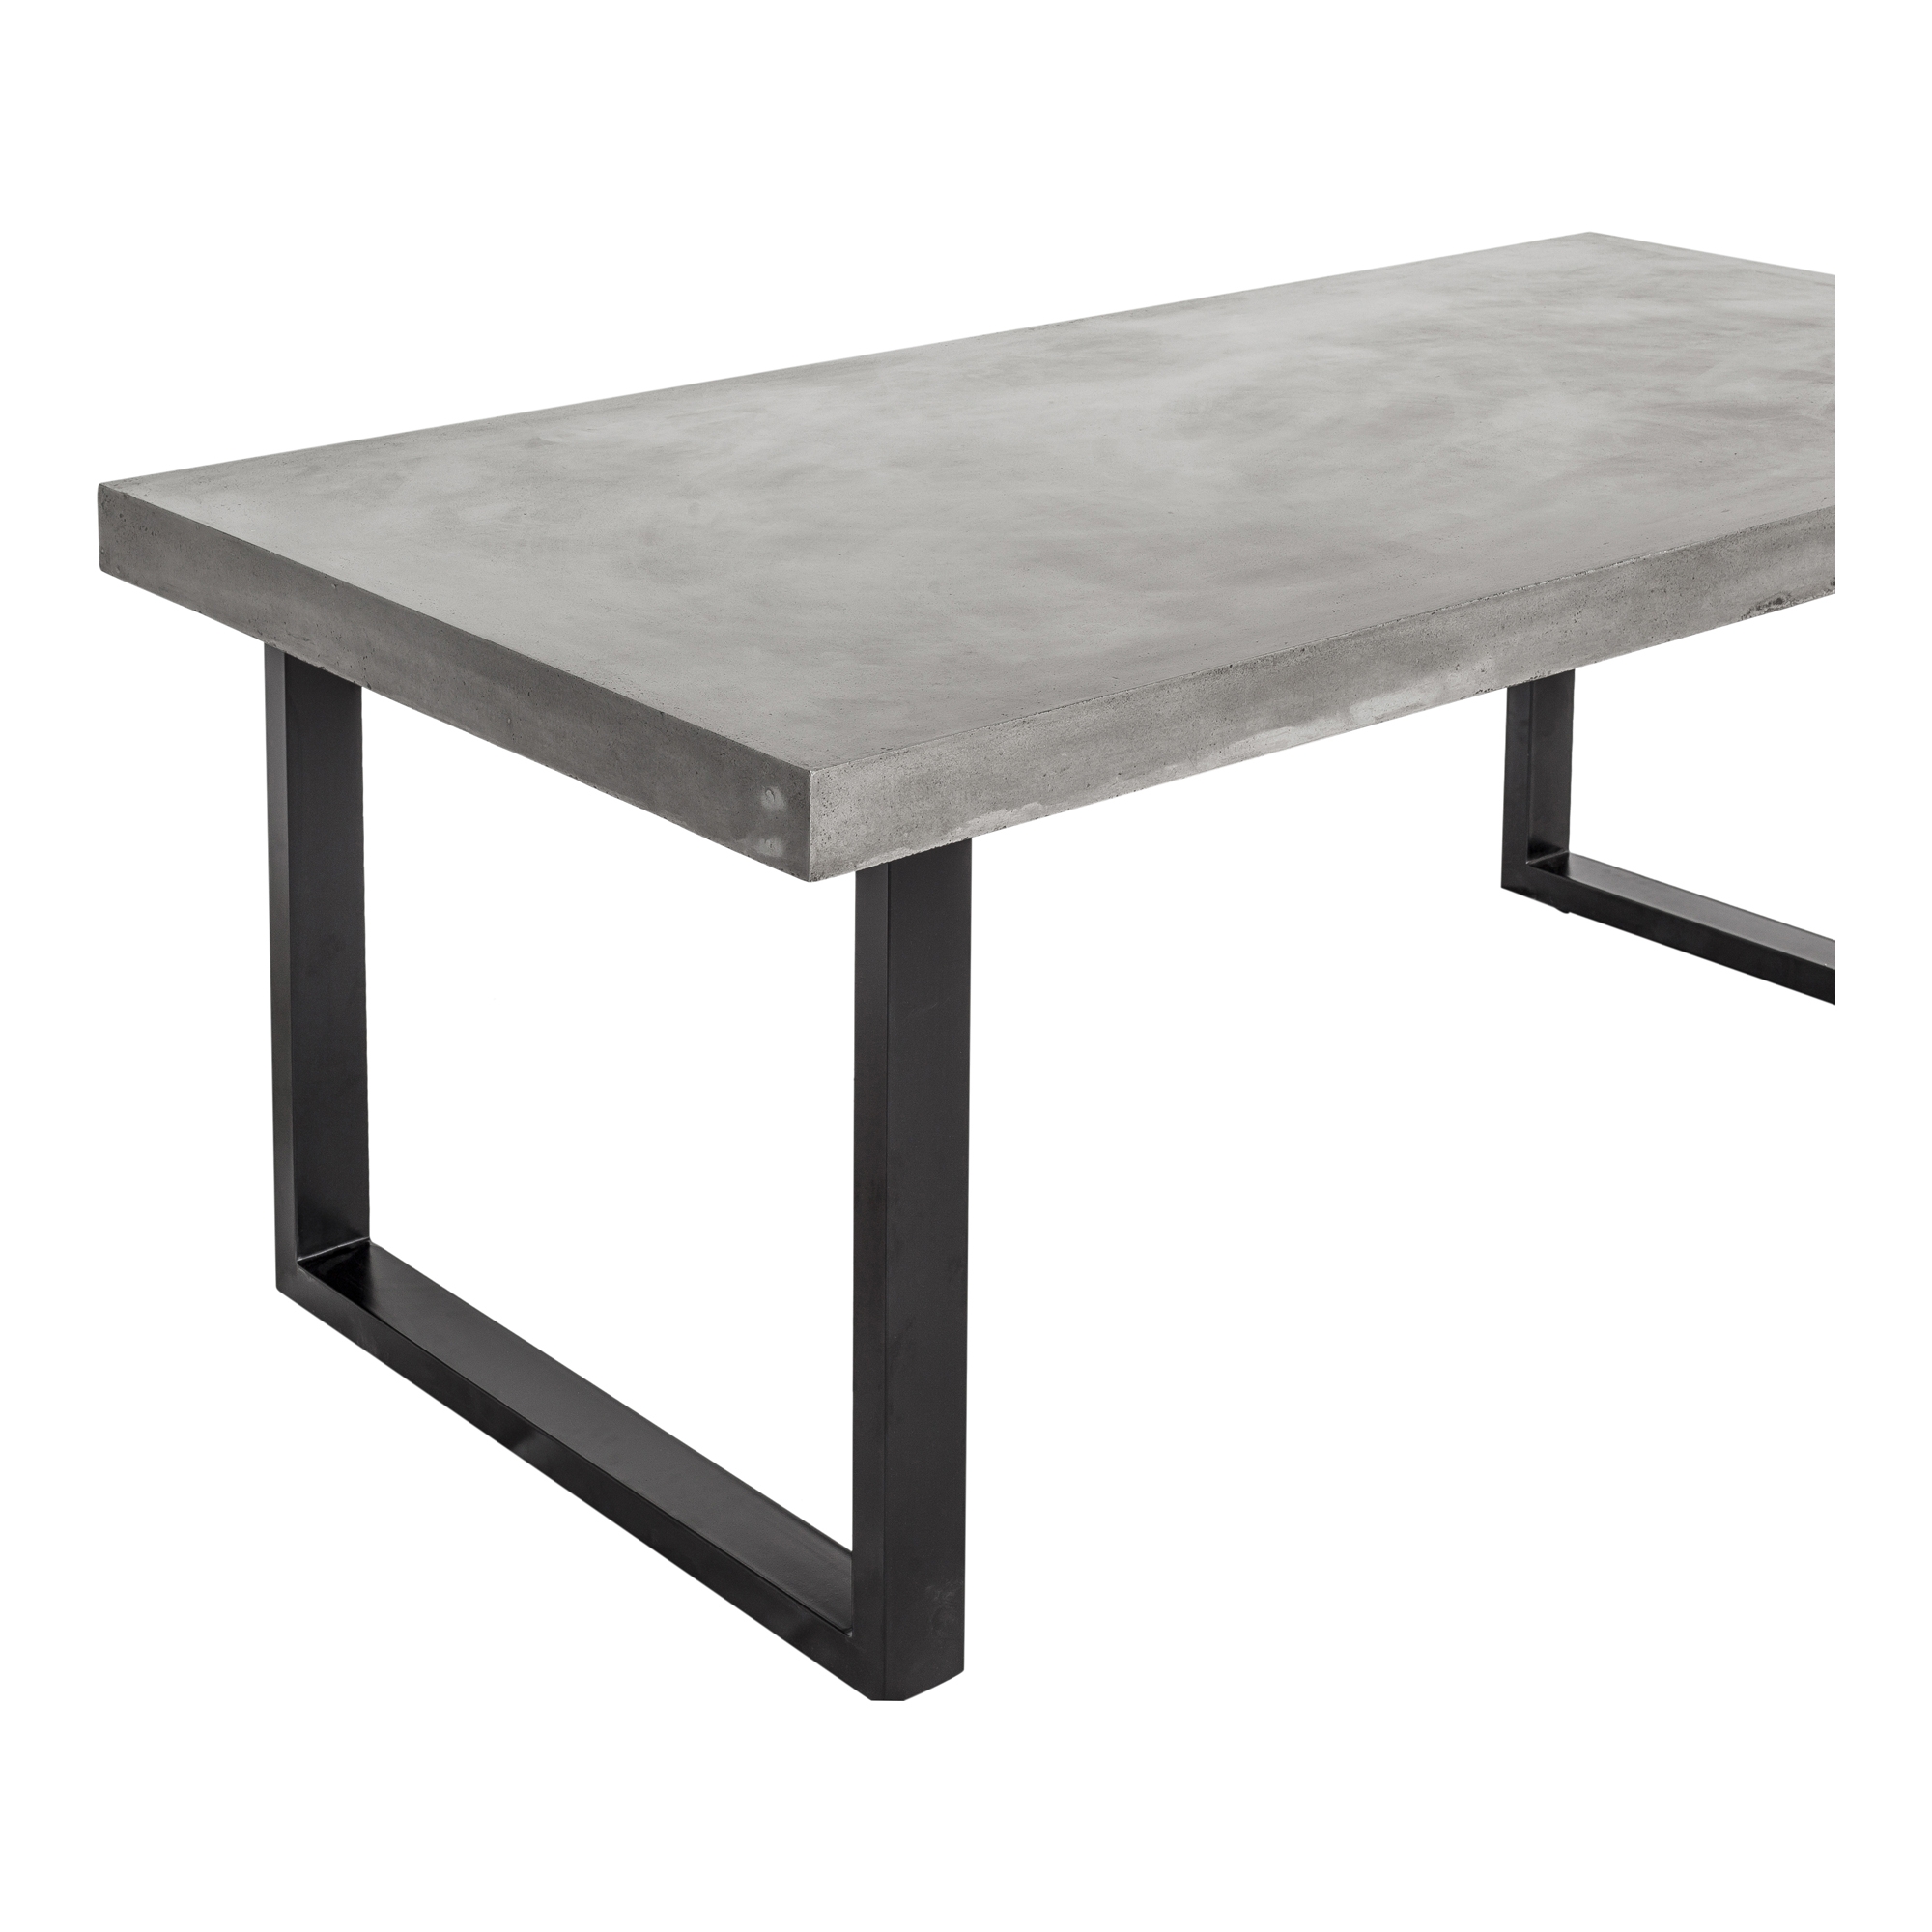 Jedrik Outdoor Dining Table Large - Image 2